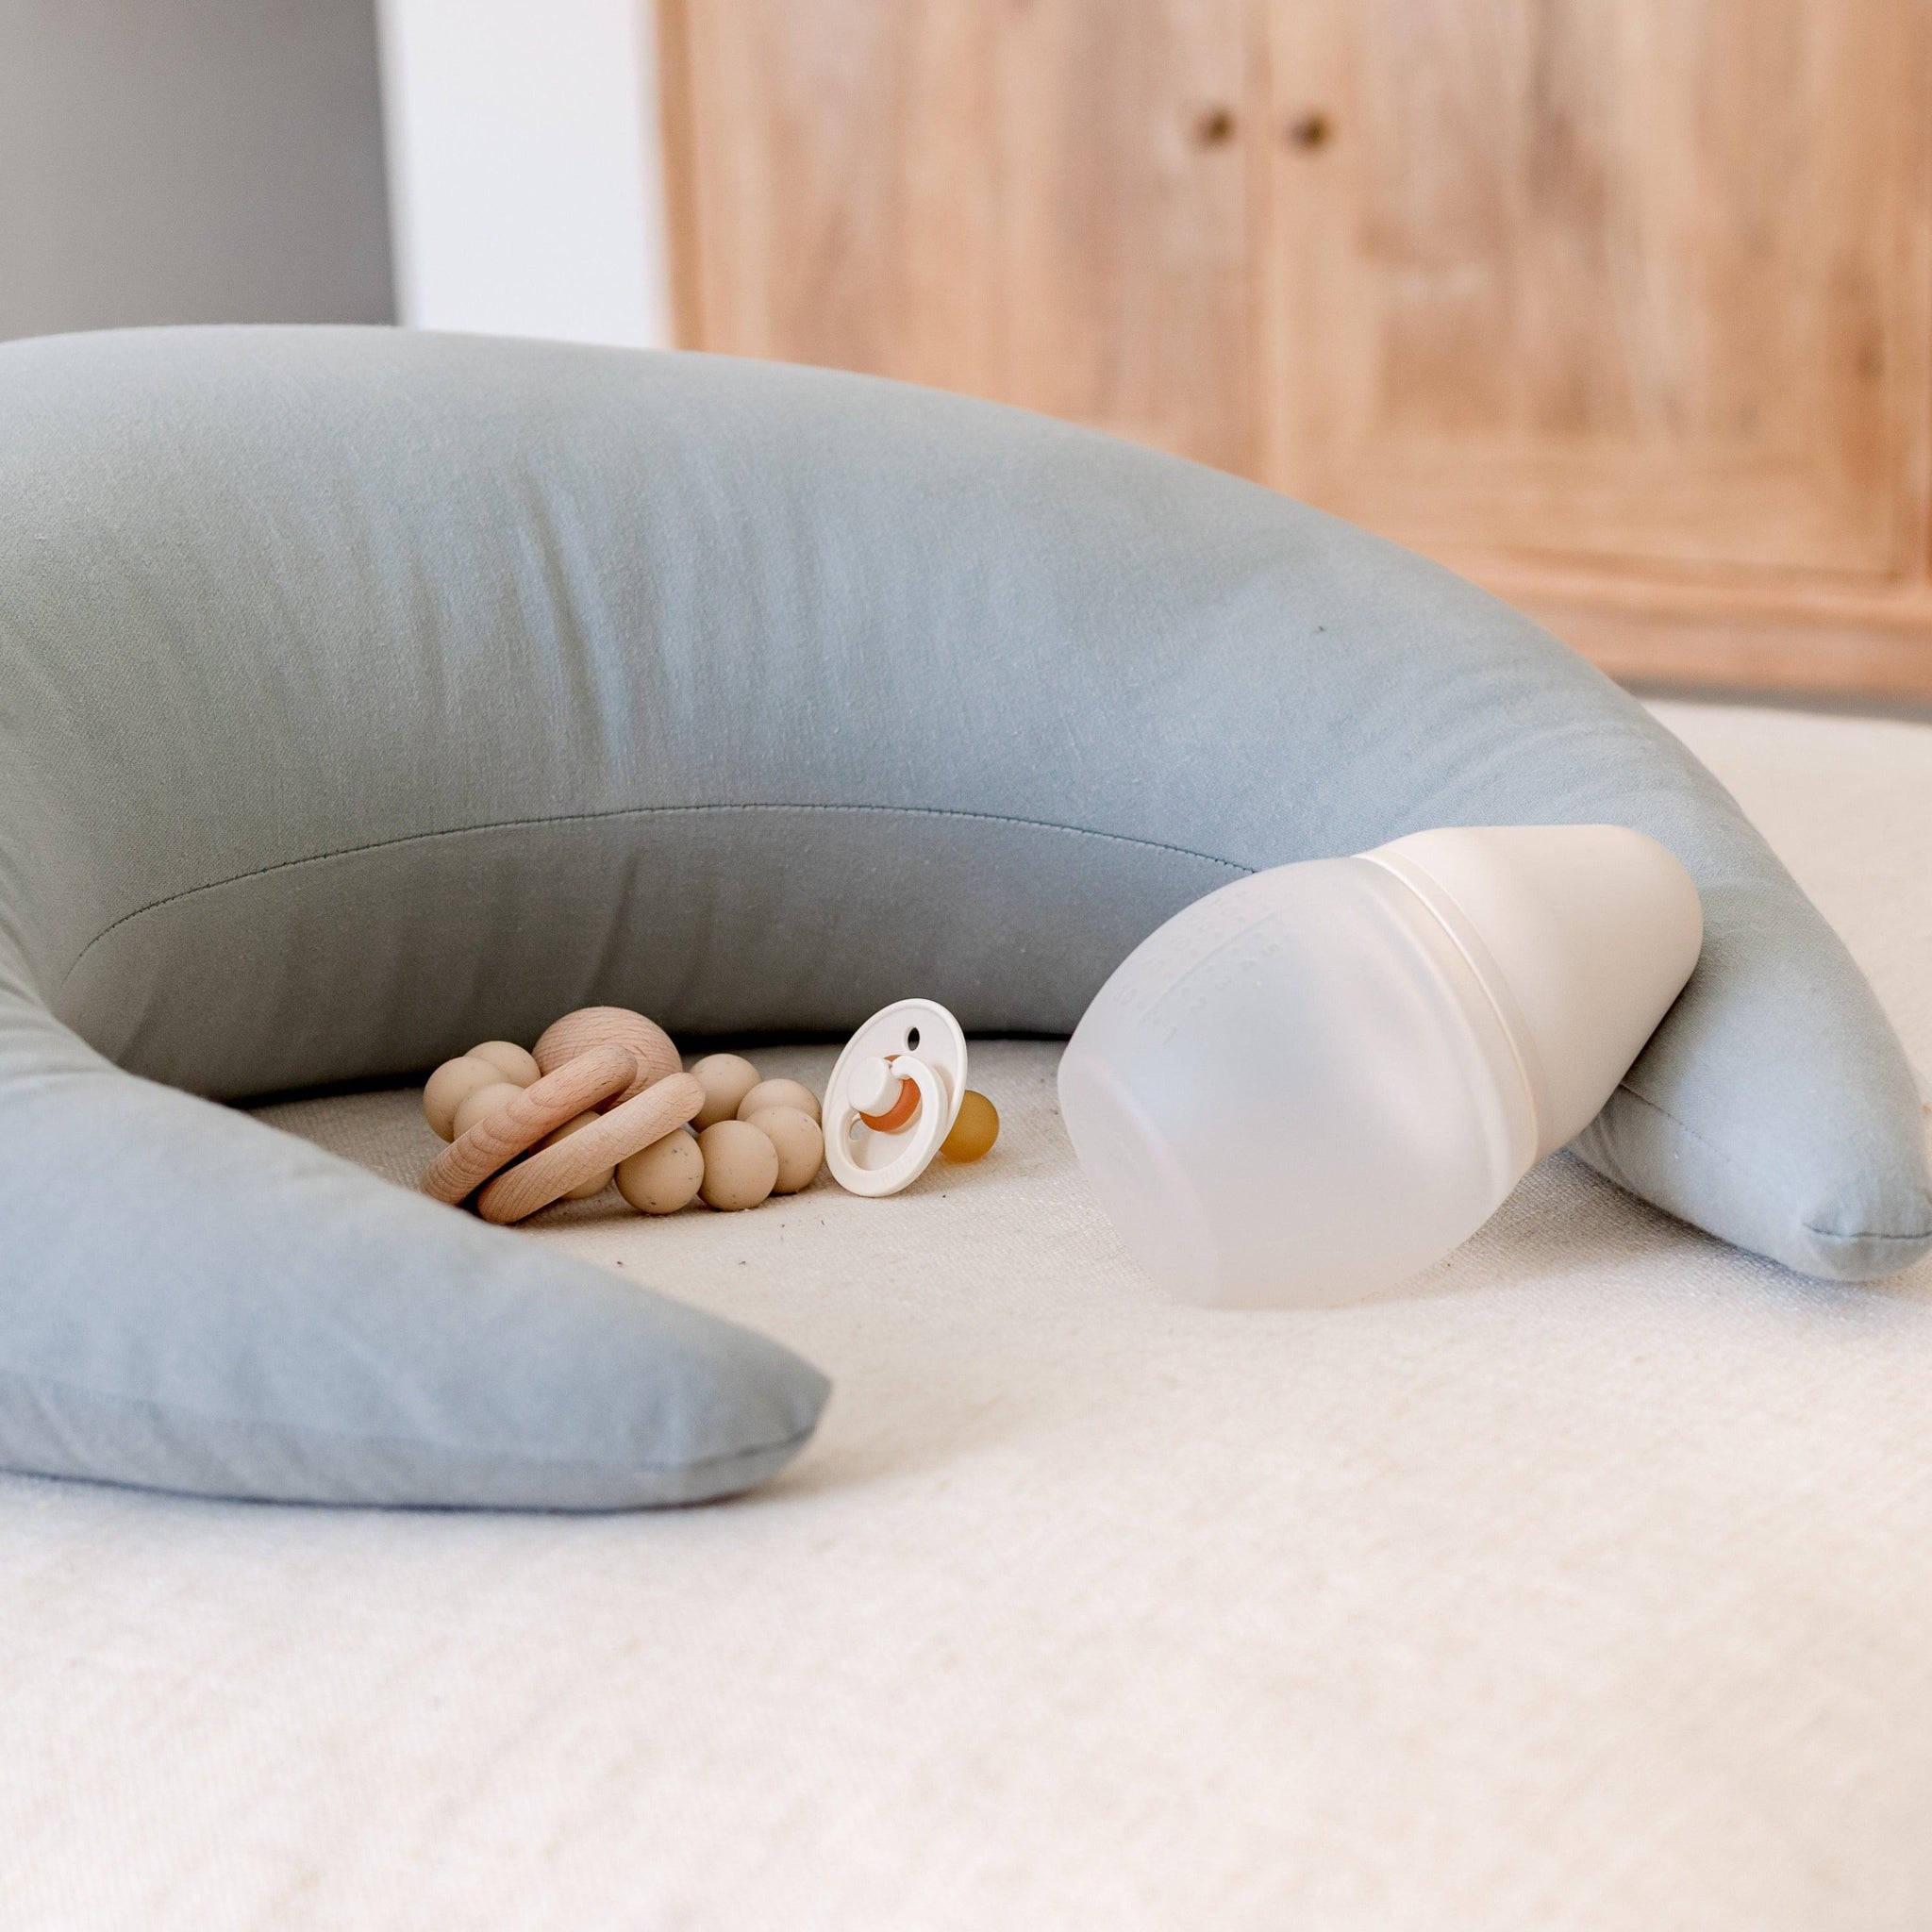 A Snuggle Me Feeding & Support Pillow | Slate with a blue bottle and toy on it.